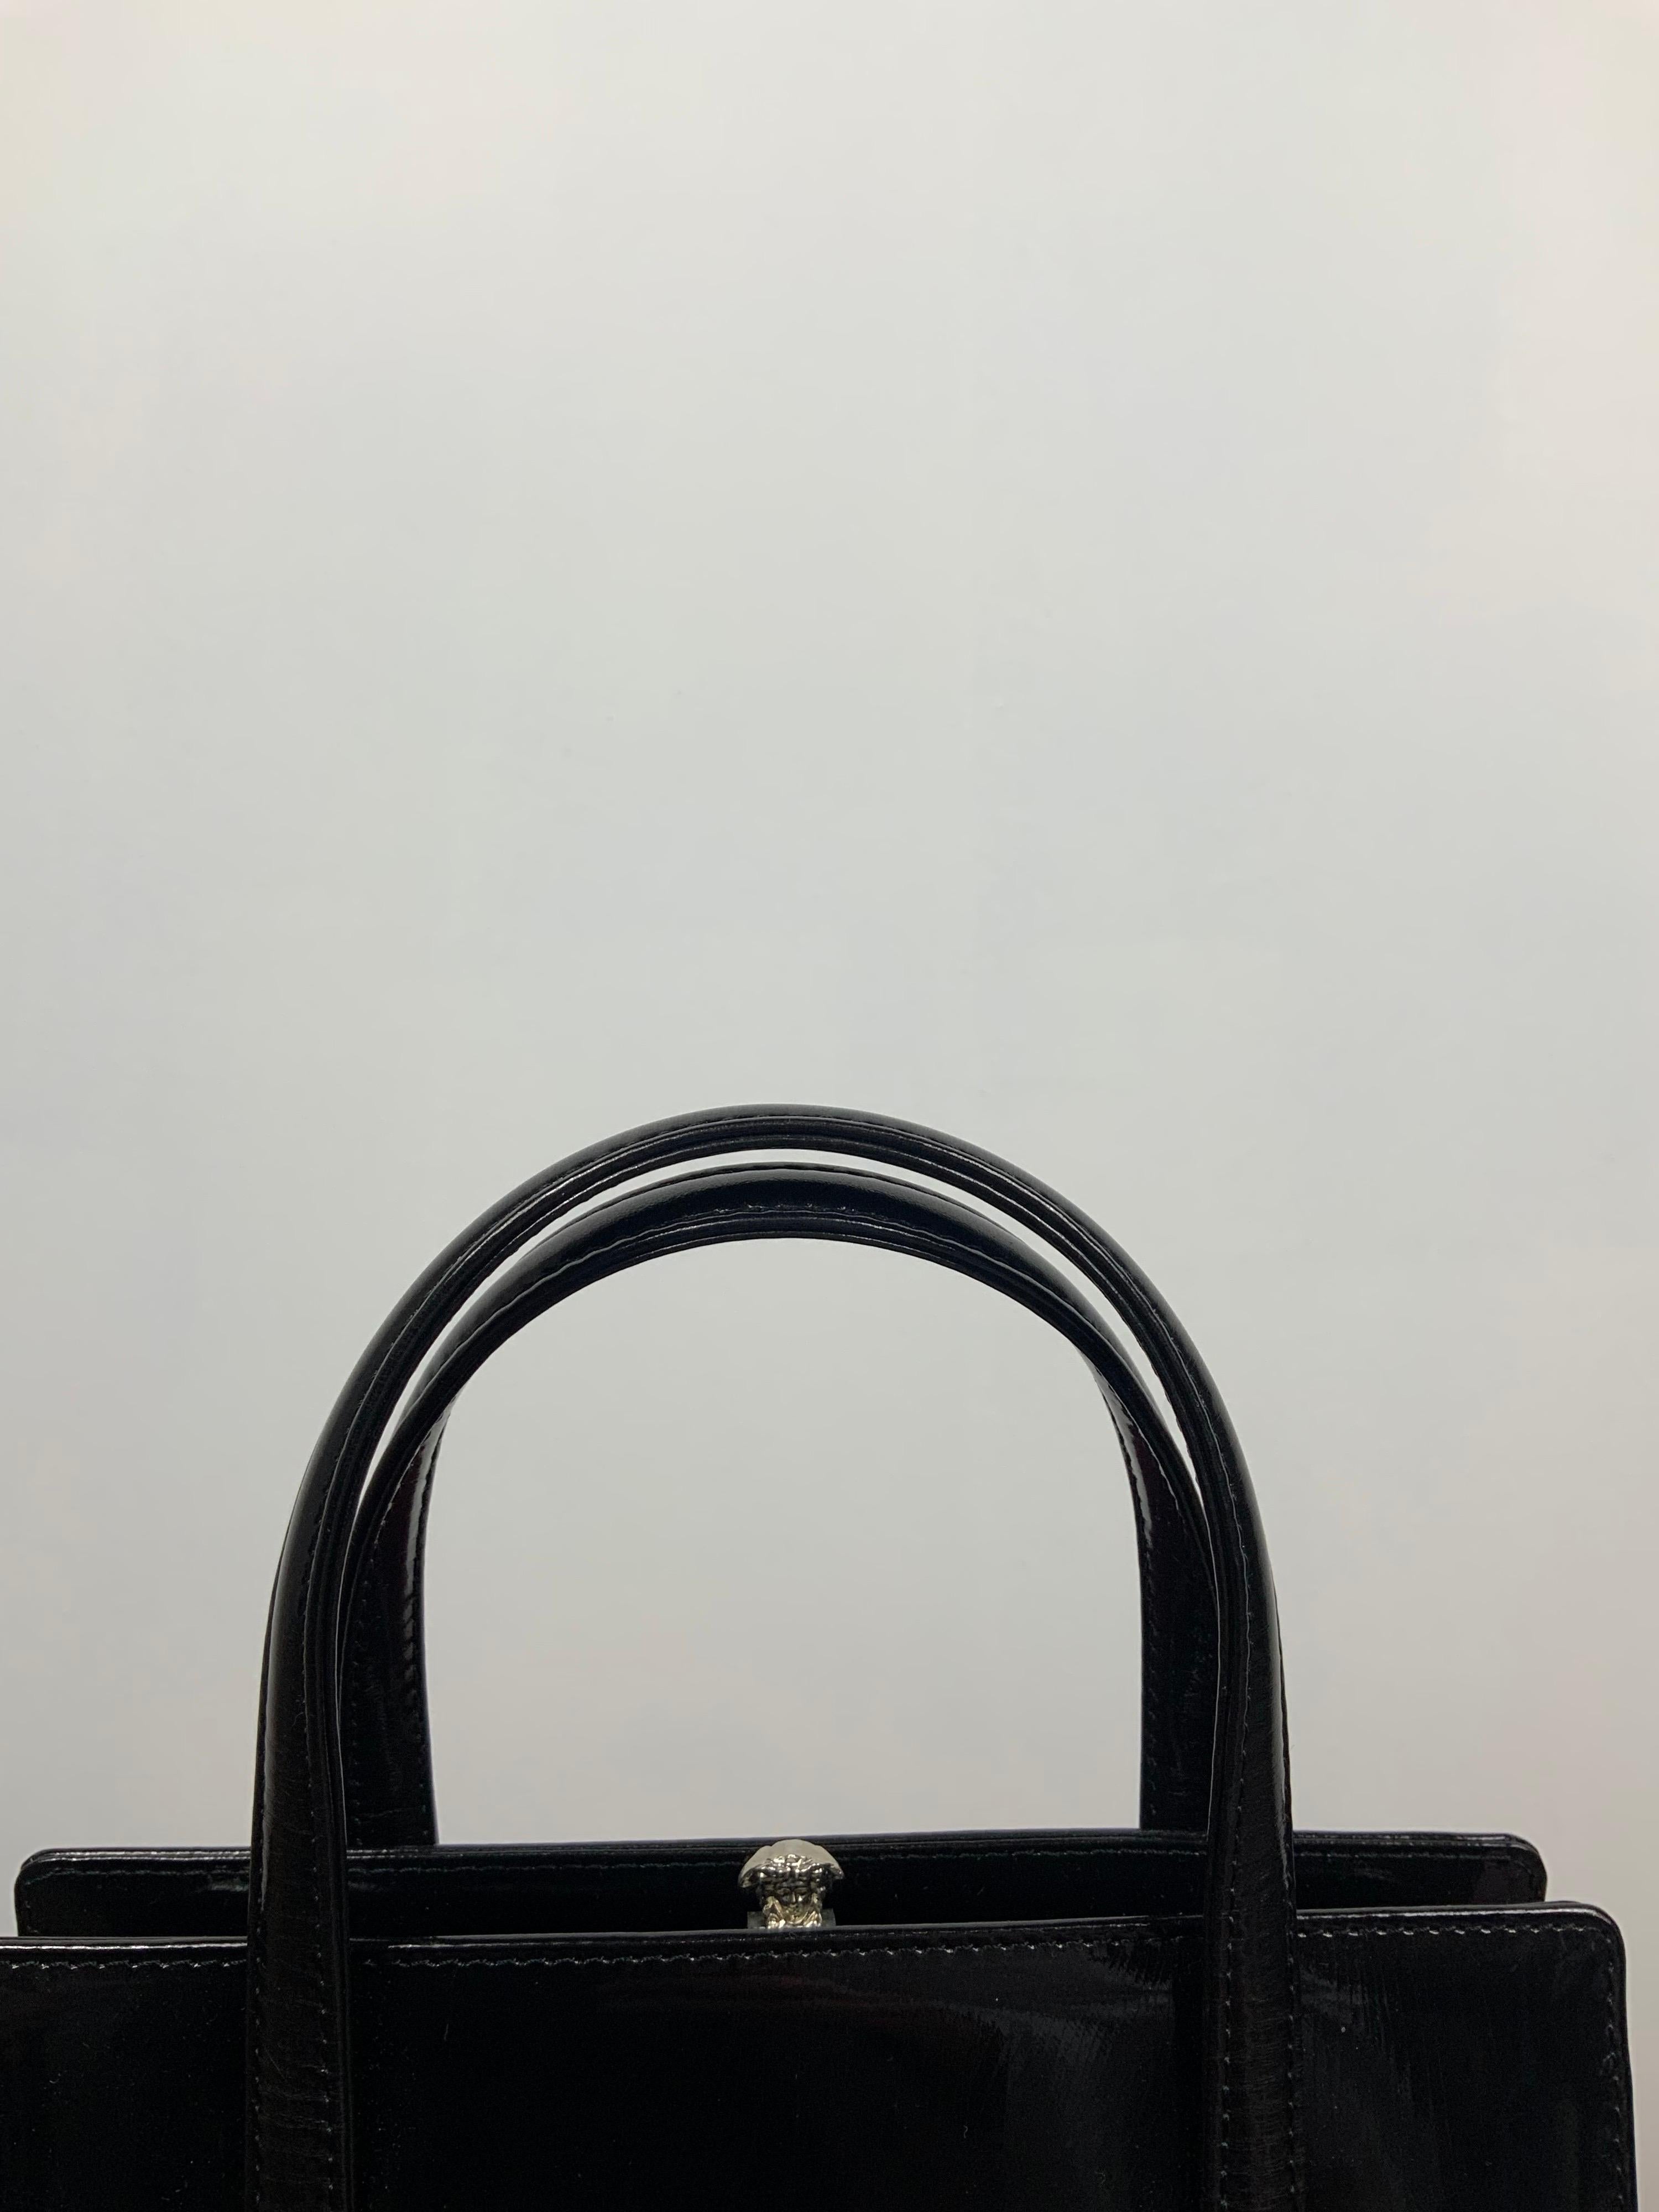 Black Gianni Versace patent leather bag 